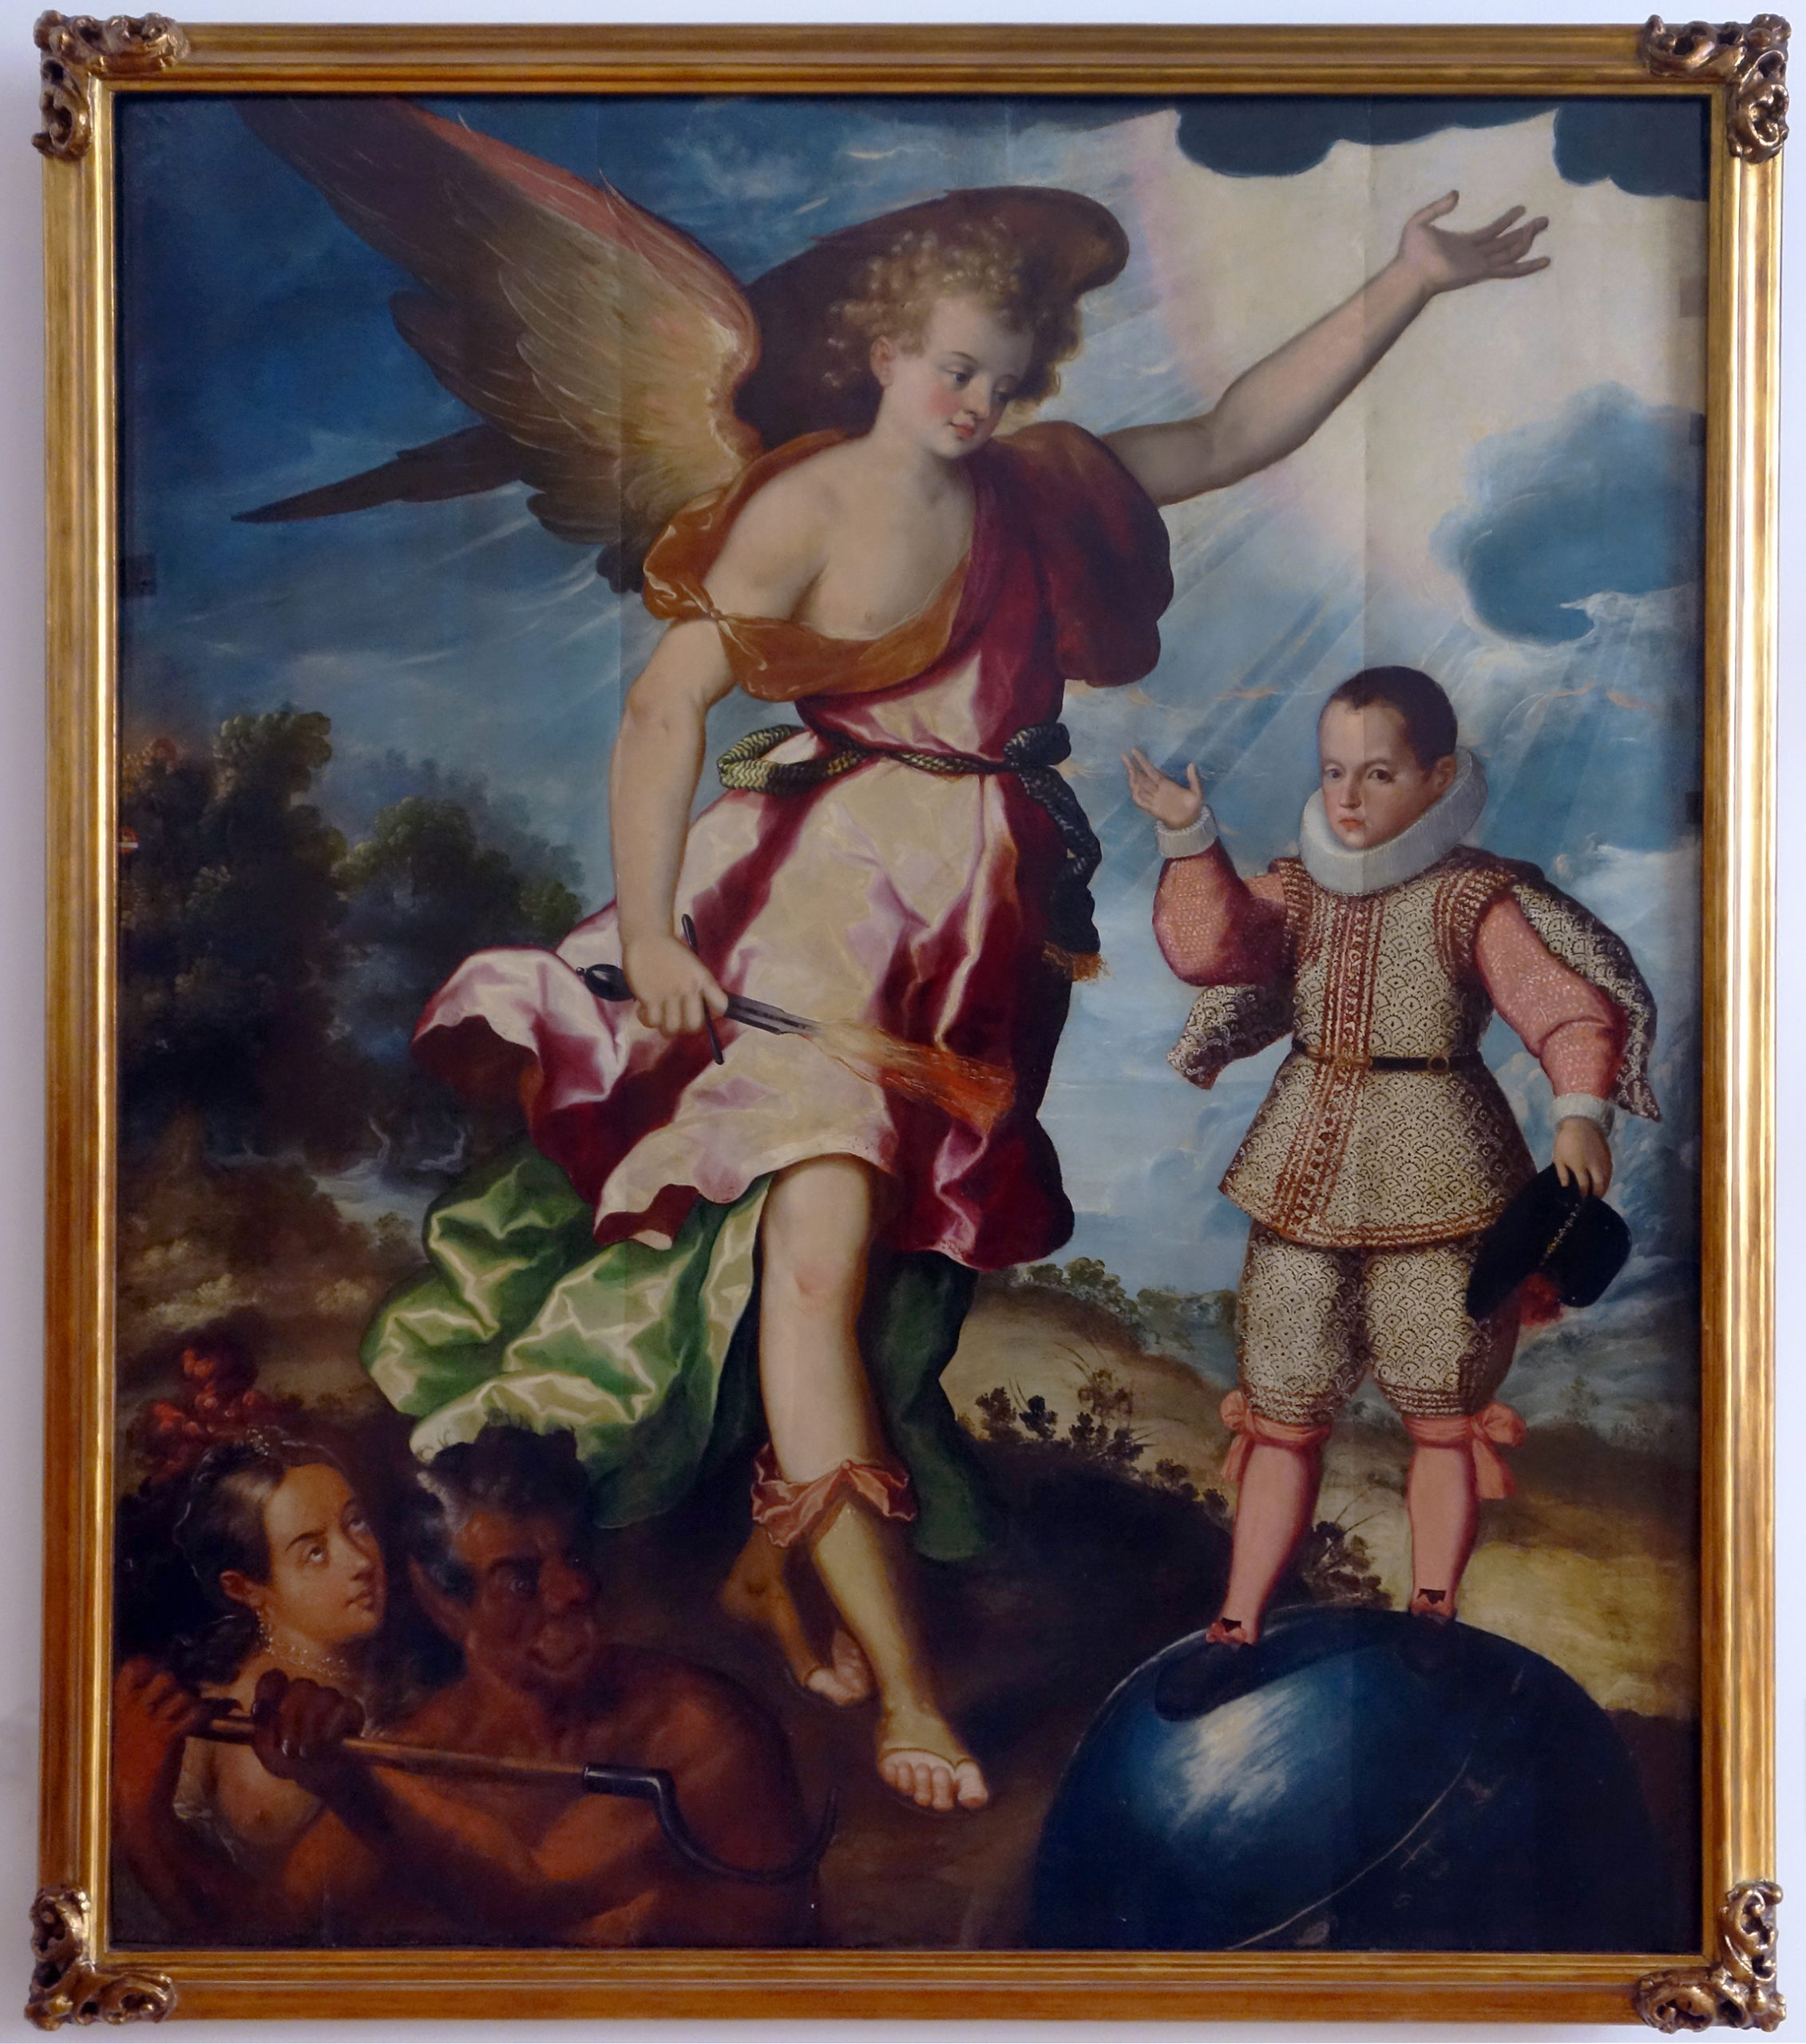 Defensive saints and angels in the Spanish Americas – Smarthistory